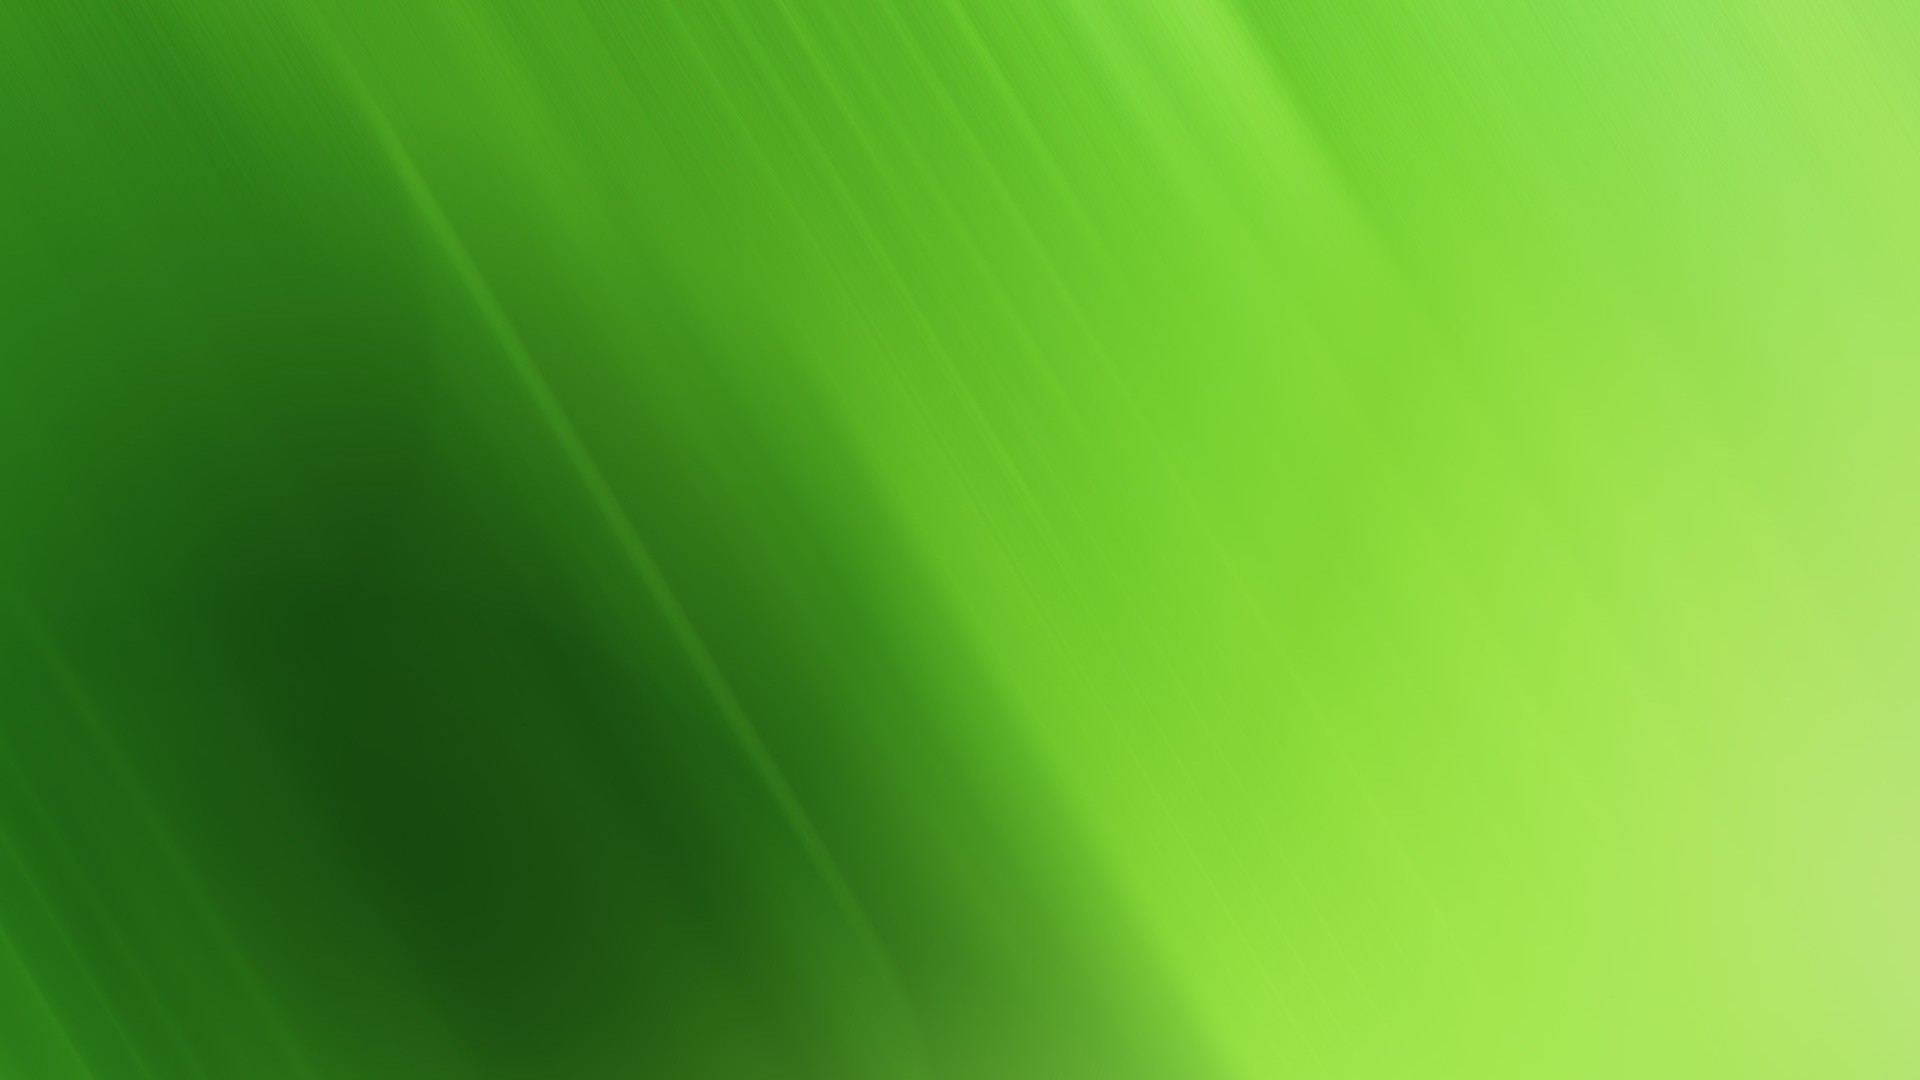 Lime Green Desktop Backgrounds HD with resolution 1920X1080 pixel. You can use this wallpaper as background for your desktop Computer Screensavers, Android or iPhone smartphones